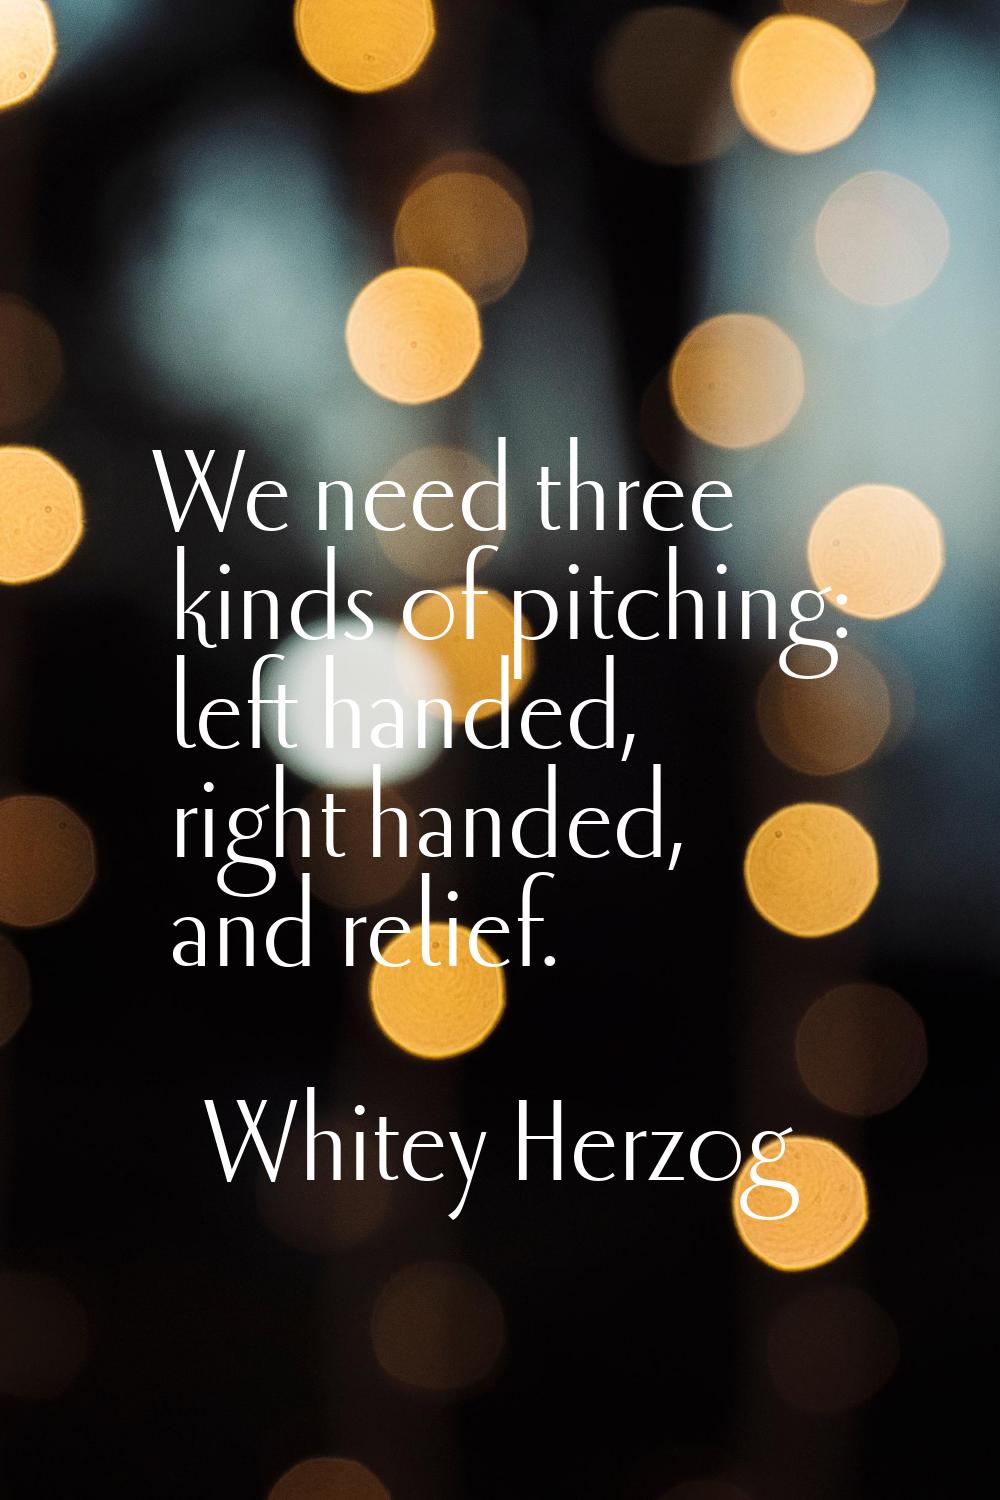 We need three kinds of pitching: left handed, right handed, and relief.